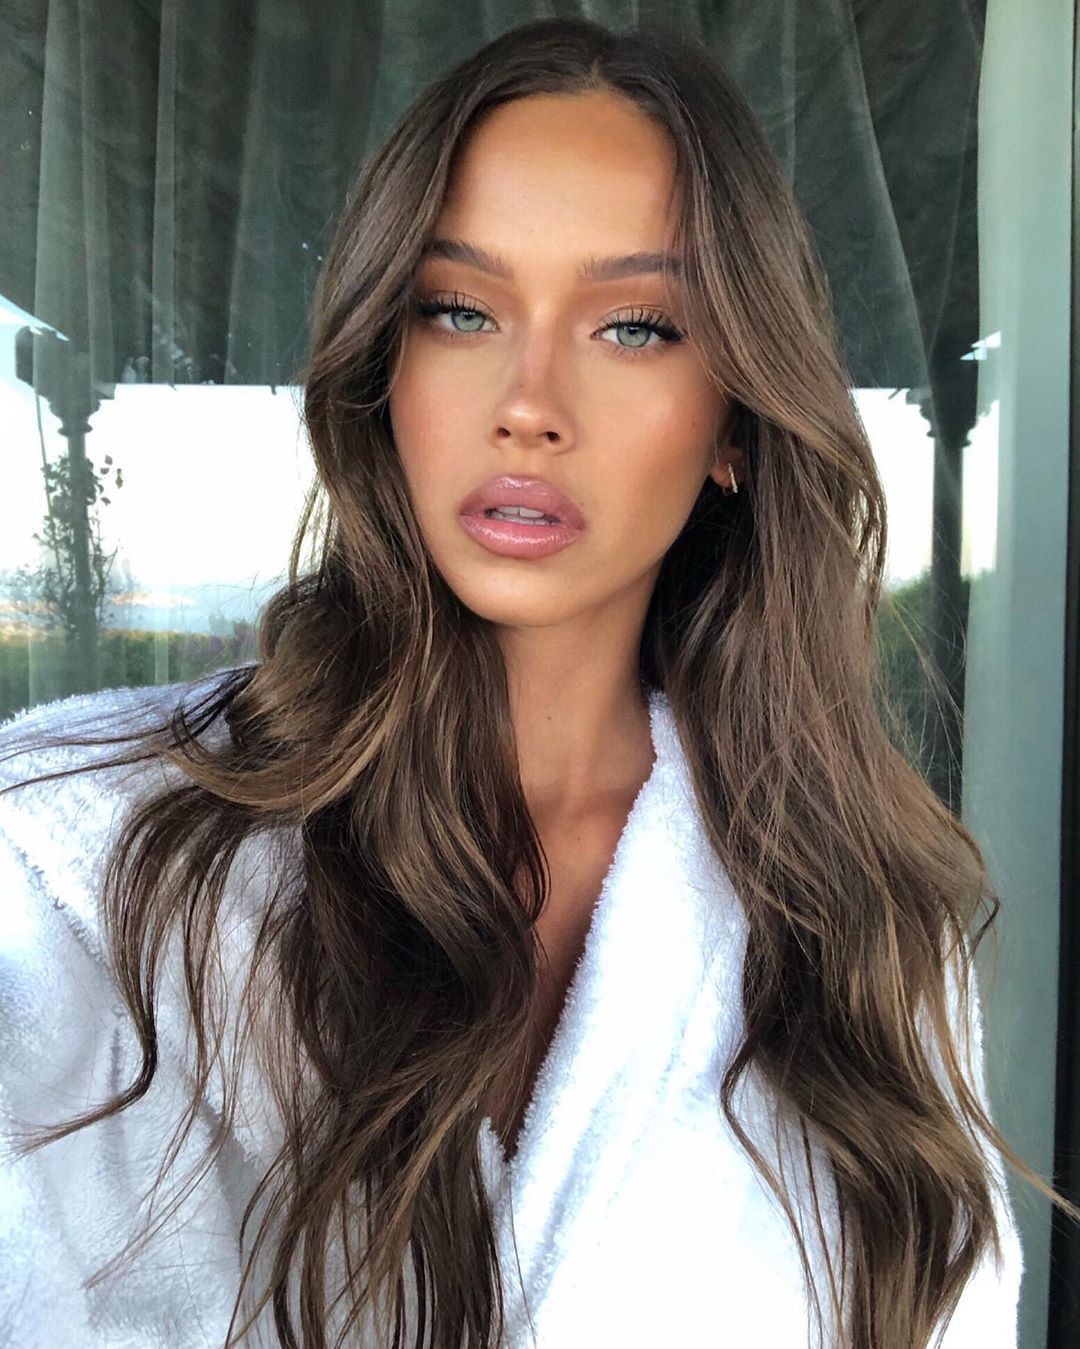 Fabulous Makeup Isabelle Mathers Wallpaper Instagram: Instagram photos,  Hot Instagram Models,  Instagram girls,  instagram models,  Isabelle Mathers,  Super Hot Isabelle Mathers  